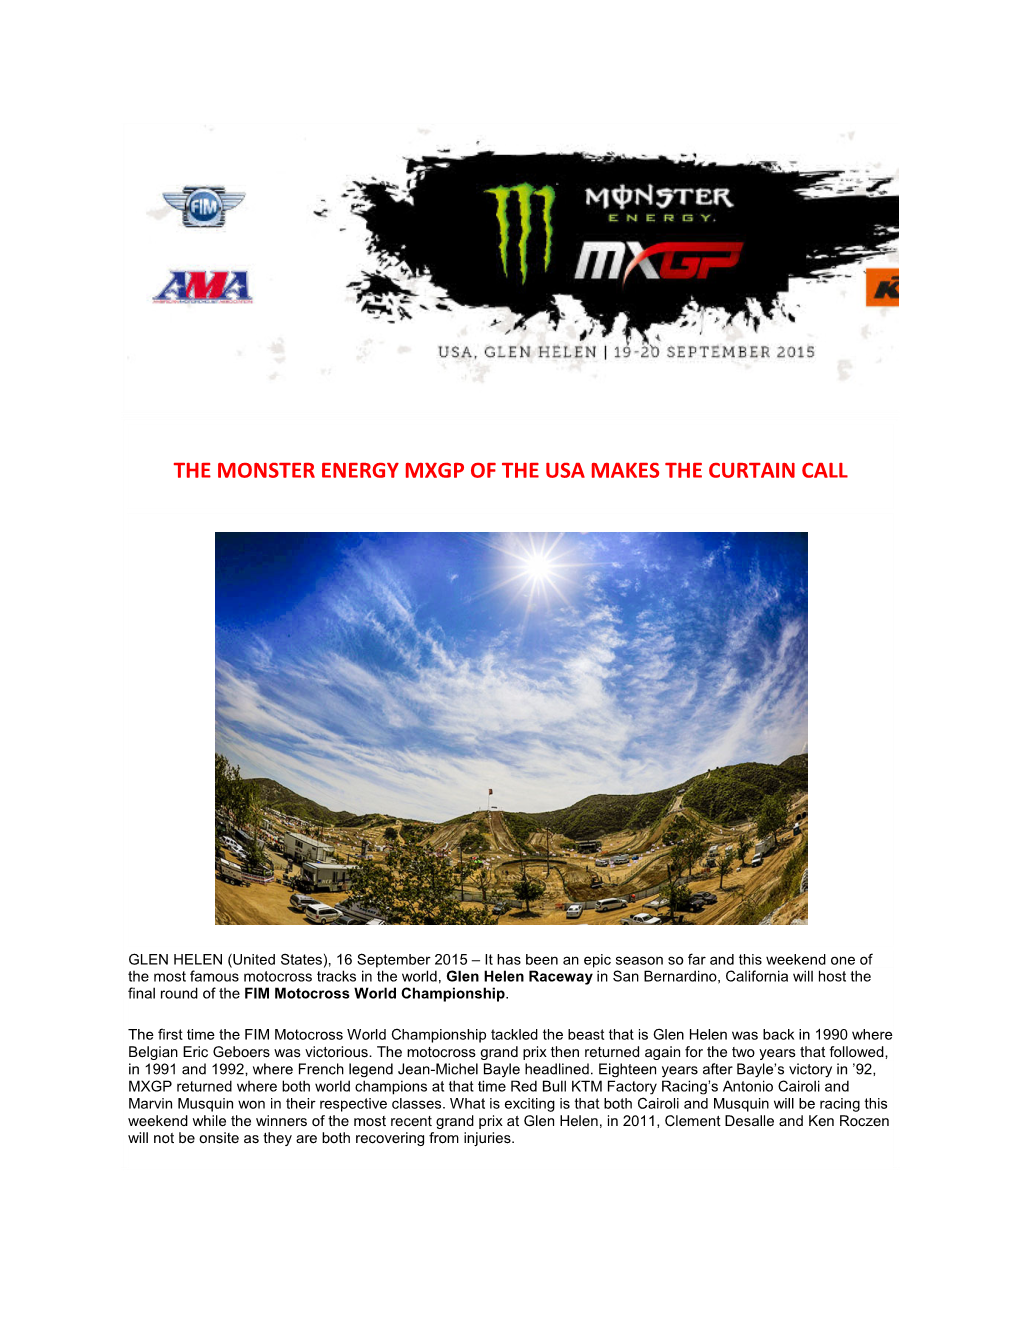 The Monster Energy Mxgp of the Usa Makes the Curtain Call